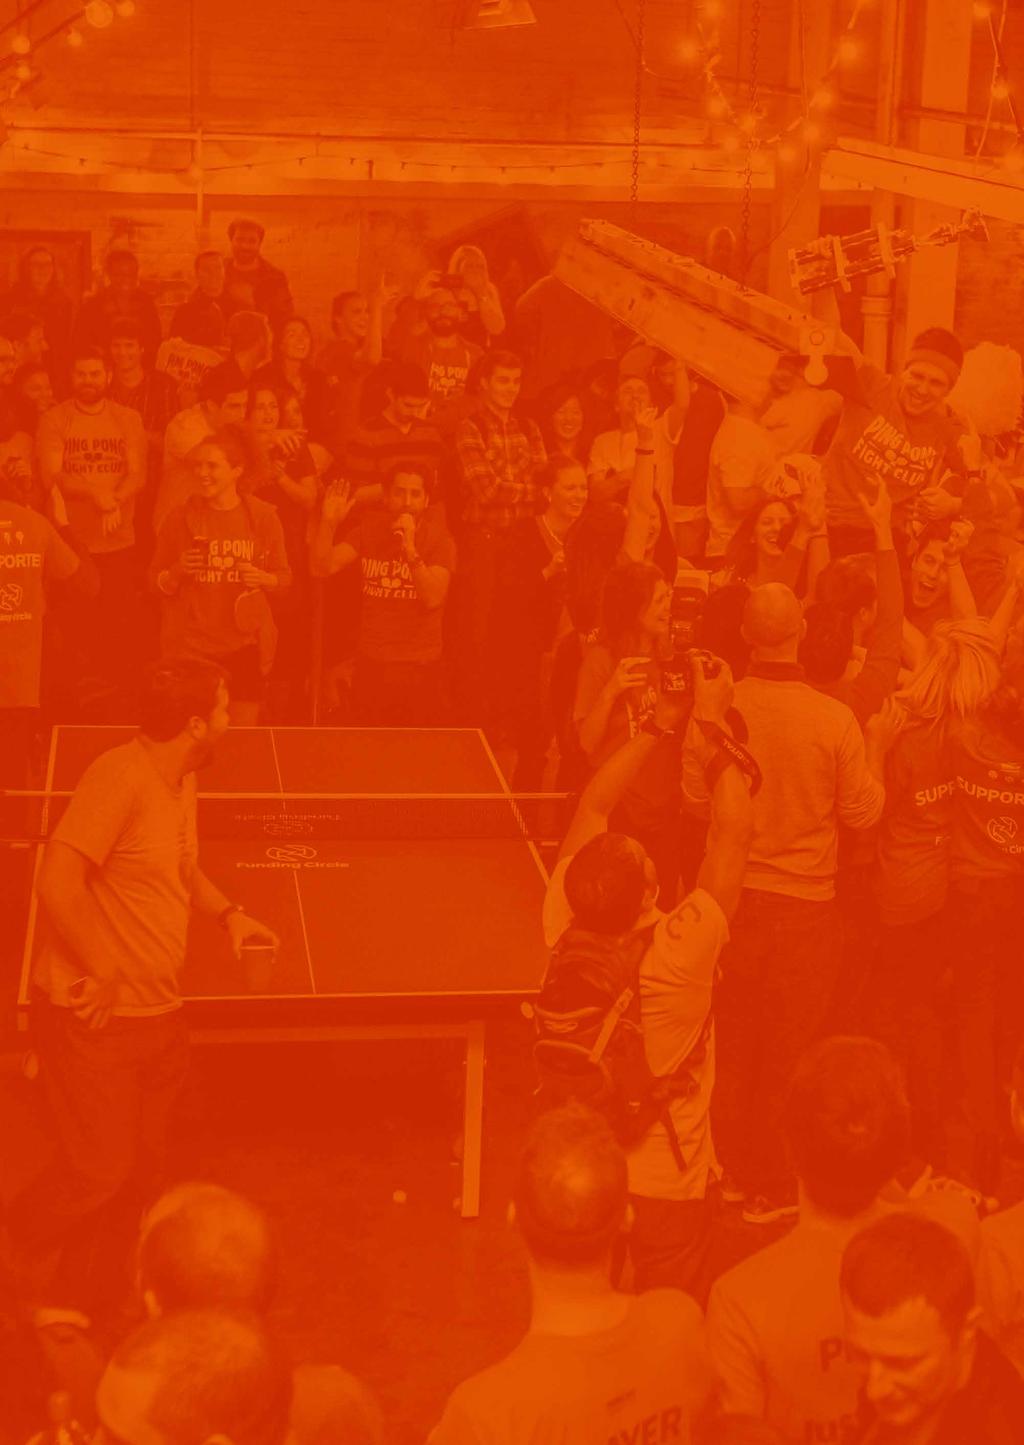 PING PONG PARTY PACKAGE 2016 OUR PHILOSOPY PING PONG ENERGISES PEOPLE S INNATE INSTINCT TO PARTICIPATE, LAUGH, HAVE FUN AND IS TOTALLY INCLUSIVE!